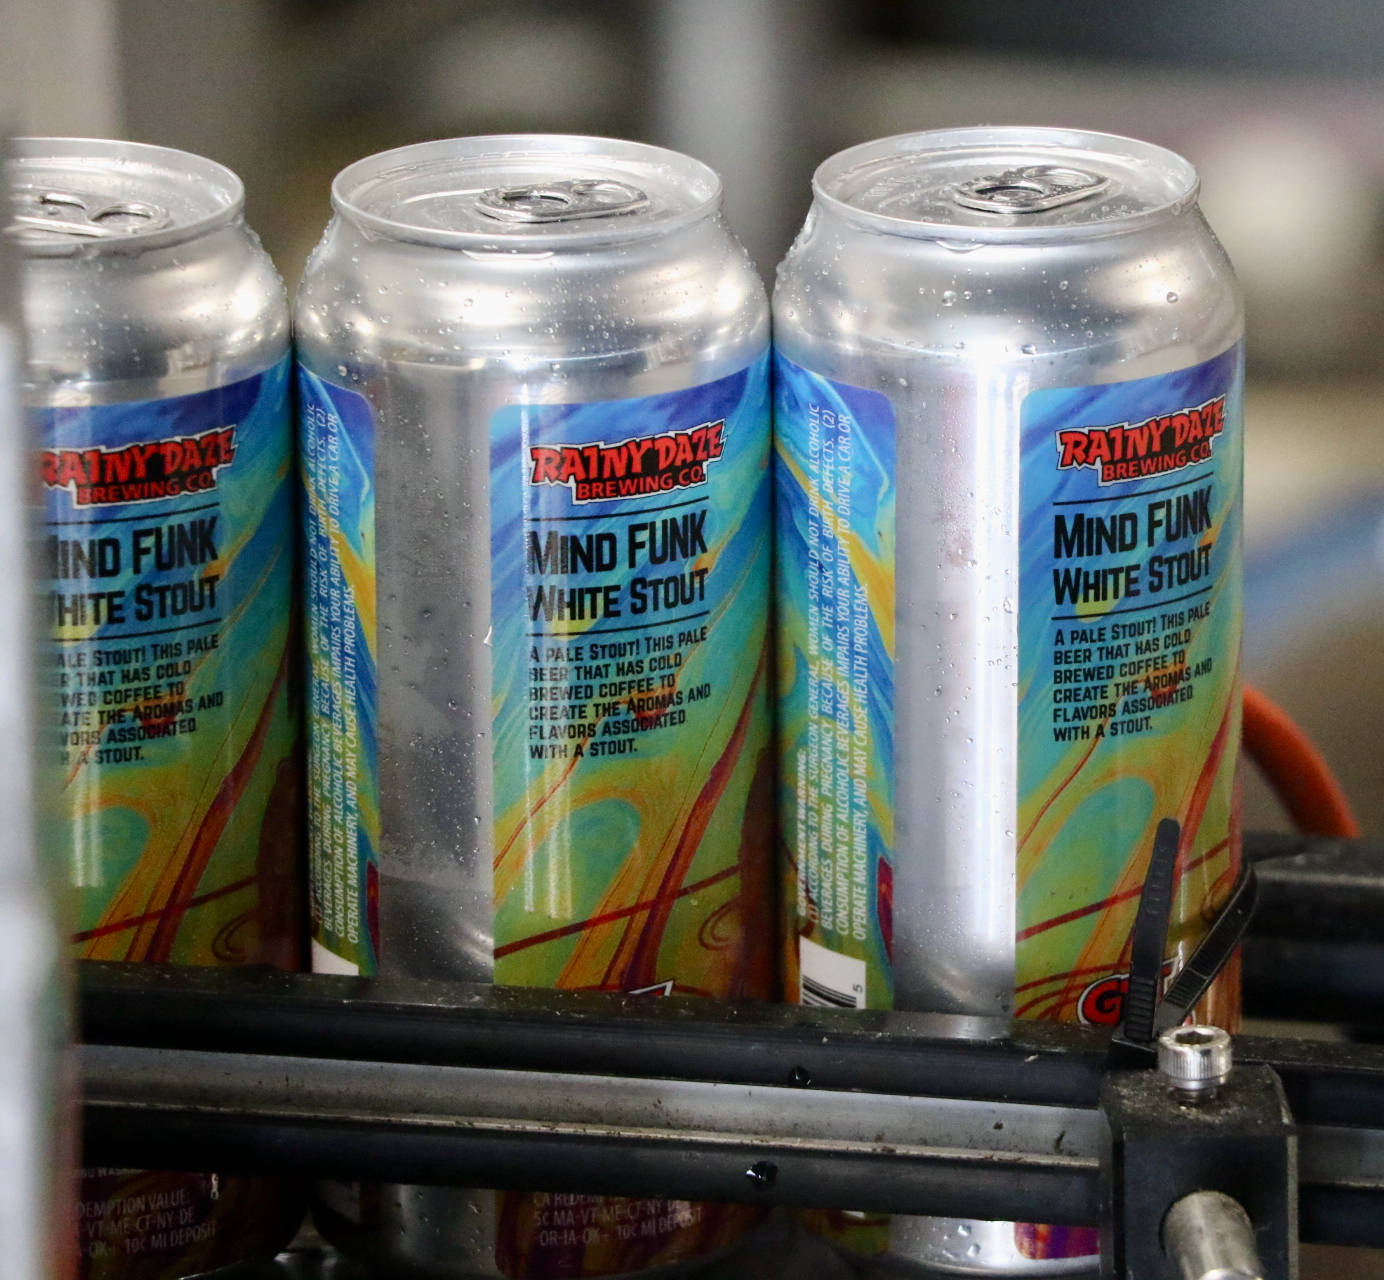 Rainy Daze Brewing tucked into a lot just off of Viking Avenue in Poulsbo, offers a wide selection of holiday beers on tap for you to take home in a Rainy Daze growler. Or you can buy a variety case of their canned beers for $60 or pick up a six pack for $22.